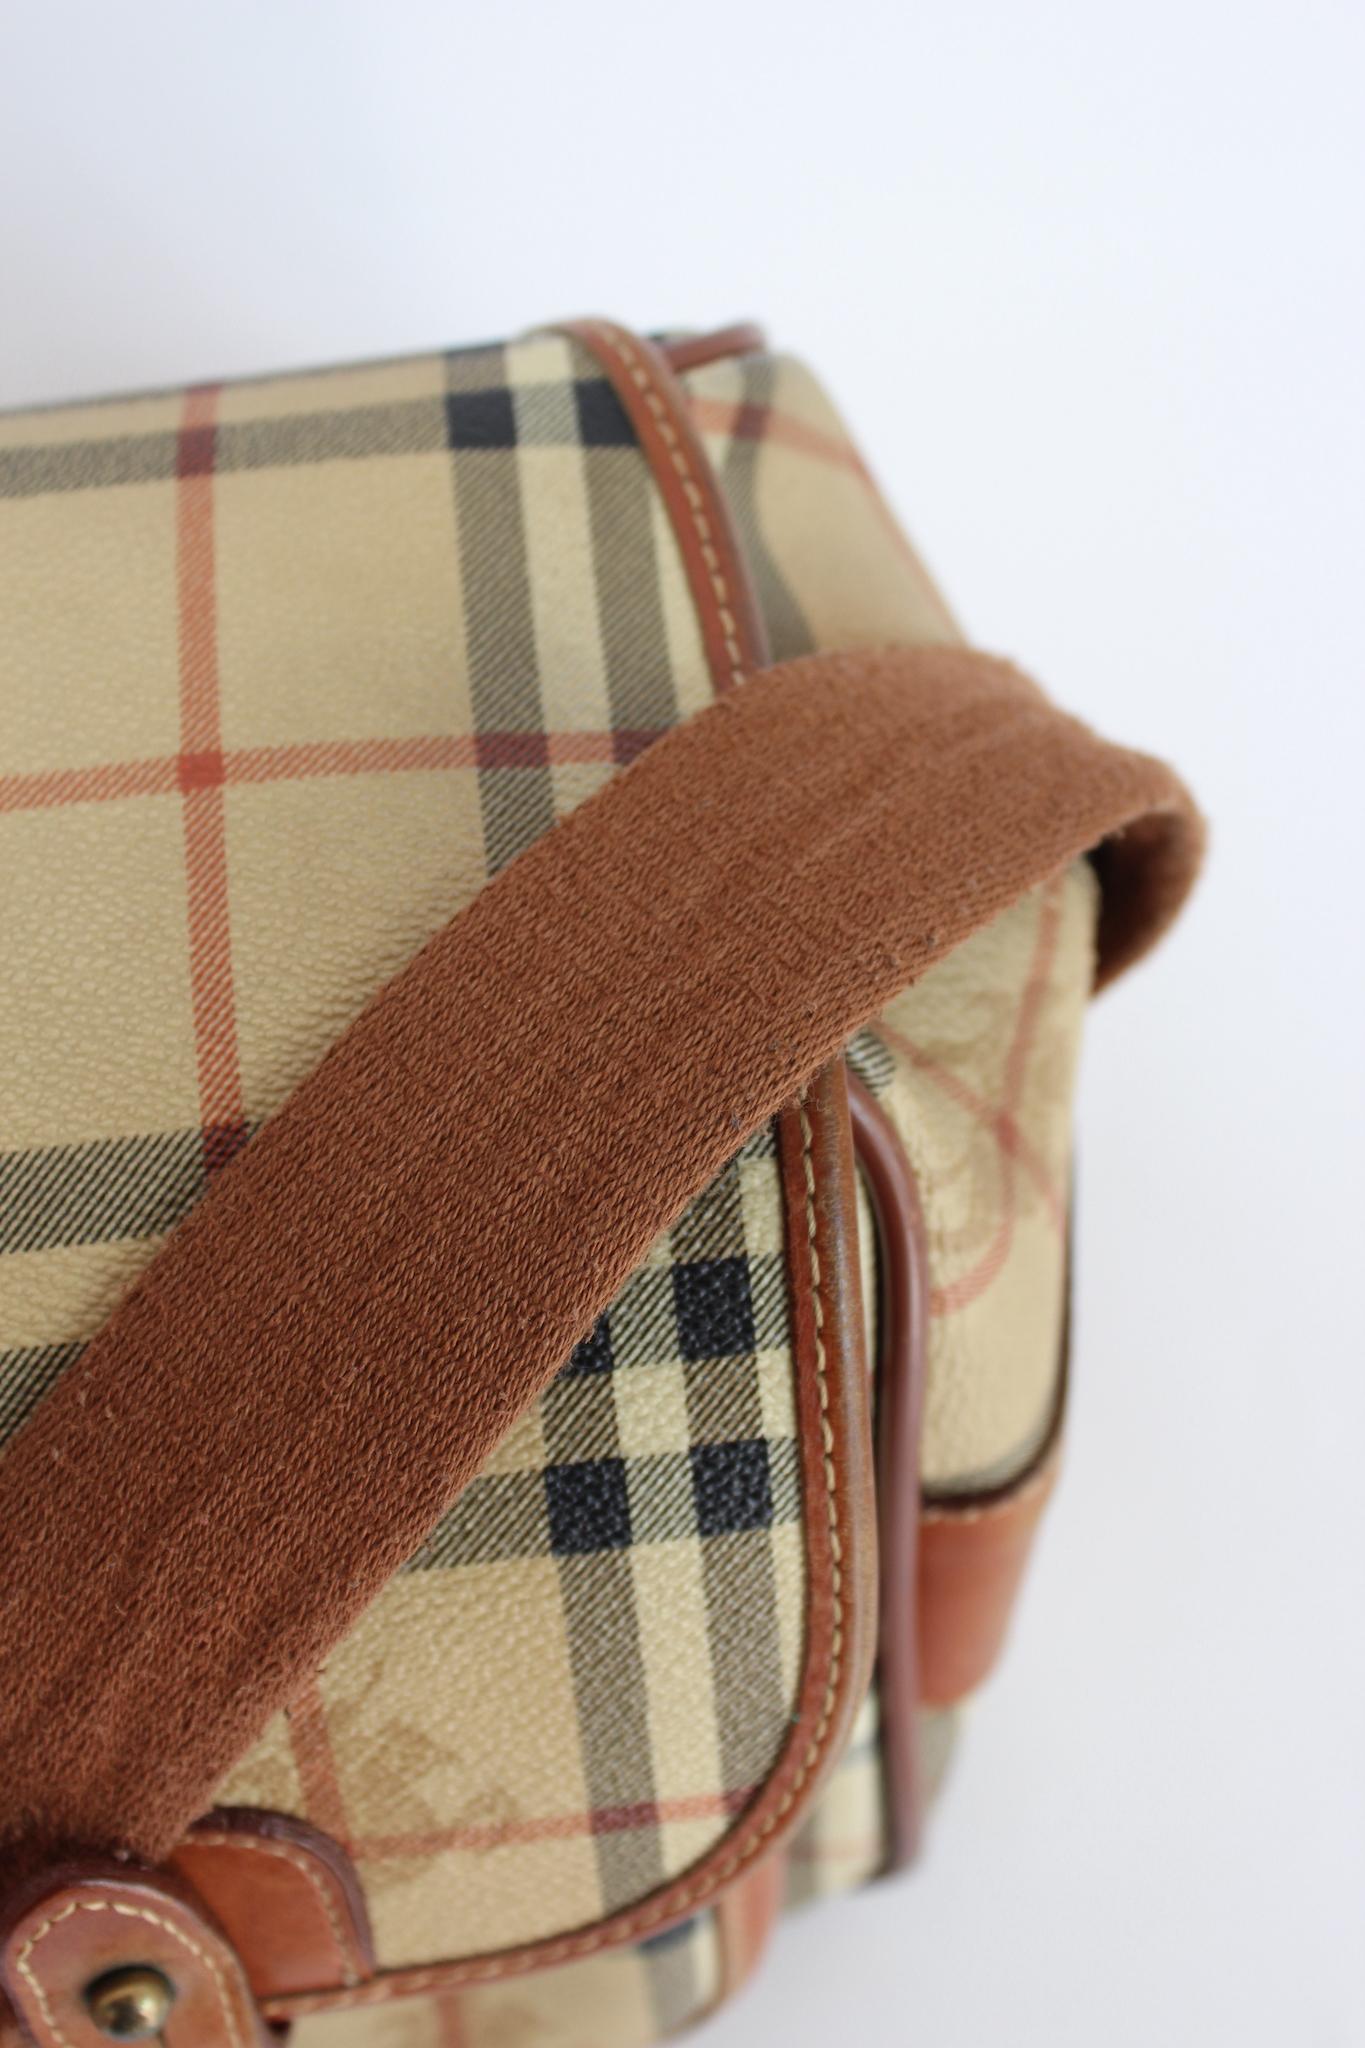 Burberry vintage 80s check trunk bag. Bag with adjustable shoulder strap, external pockets, buckle and zip closure. Canvas and leather fabric with typical Burberry pattern. Made in Italy. The bag is in perfect external and internal conditions, the